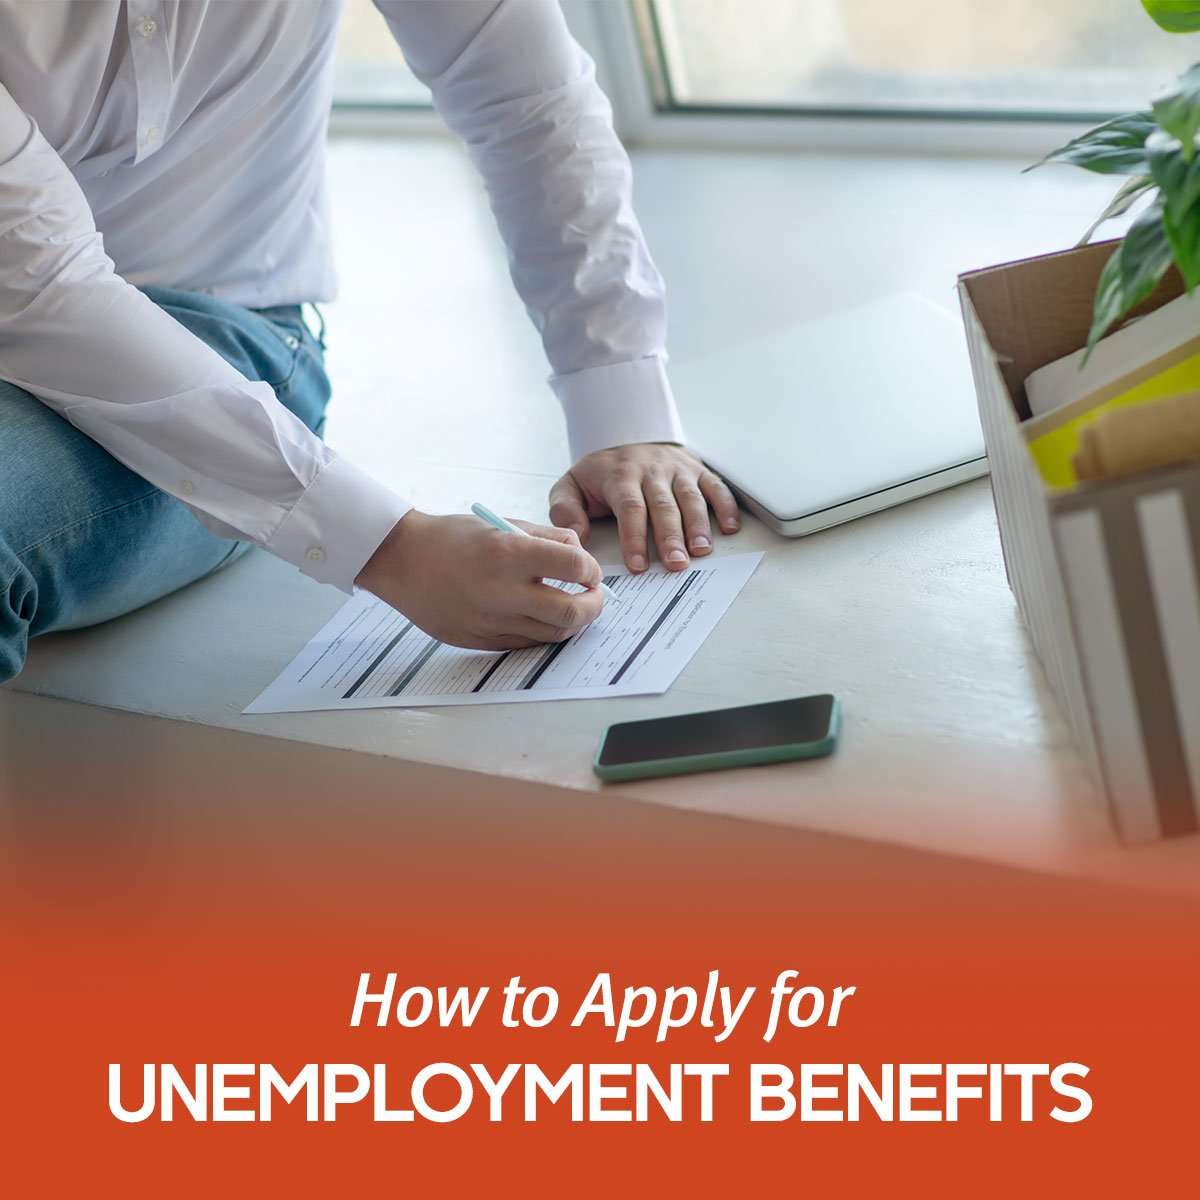 How To Apply For Unemployment Benefits